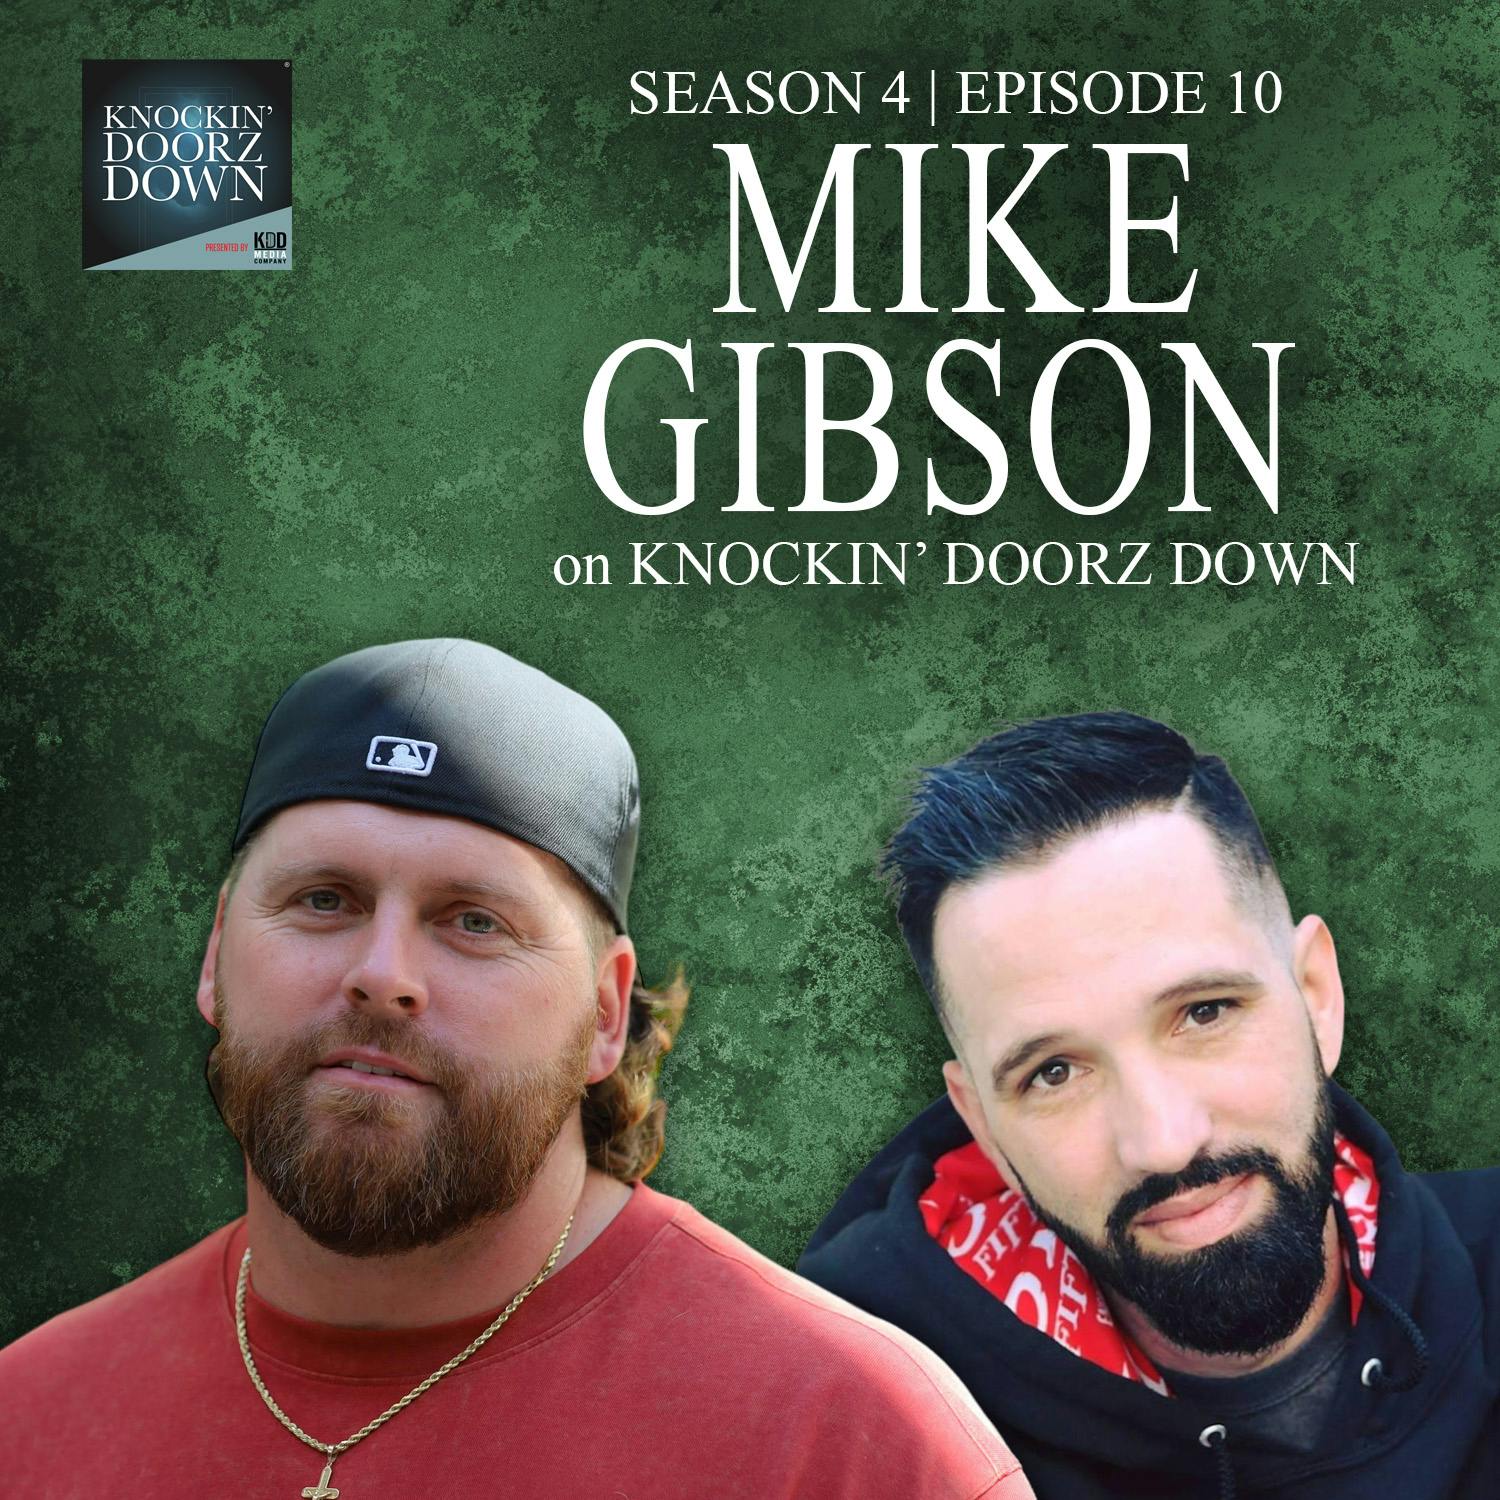 Mike Gibson | From NFL Standout To Addiction, Finding A Higher Power, Sobriety & Spreading Hope